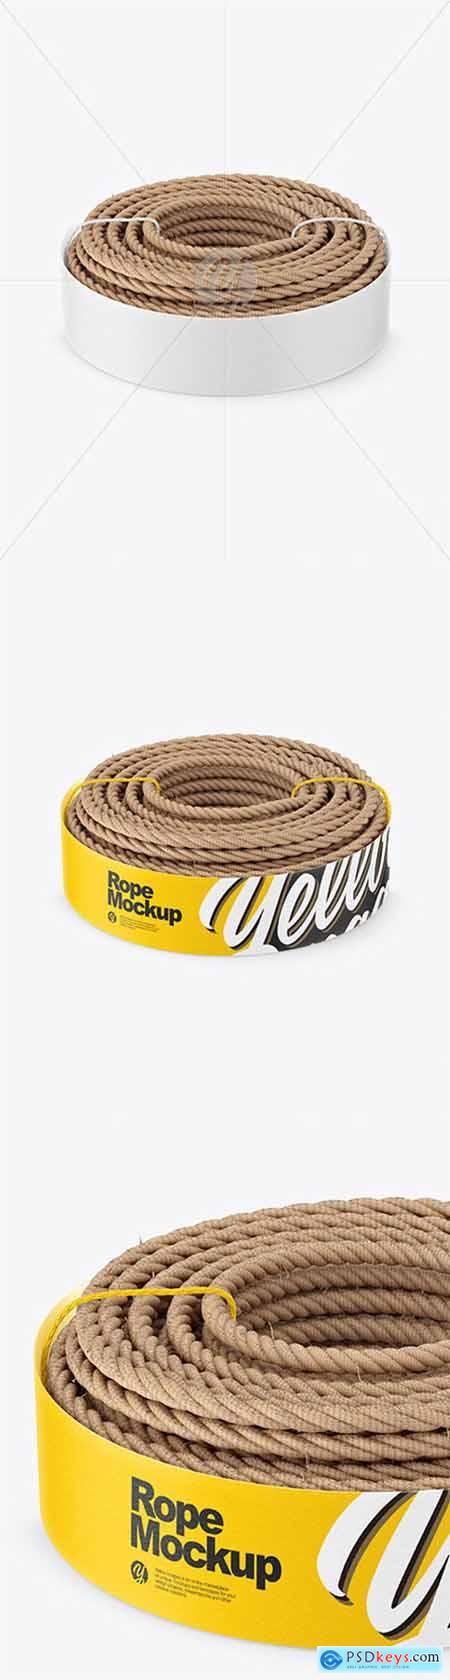 Twisted Sisal Rope Package Mockup - High-Angle View 61259